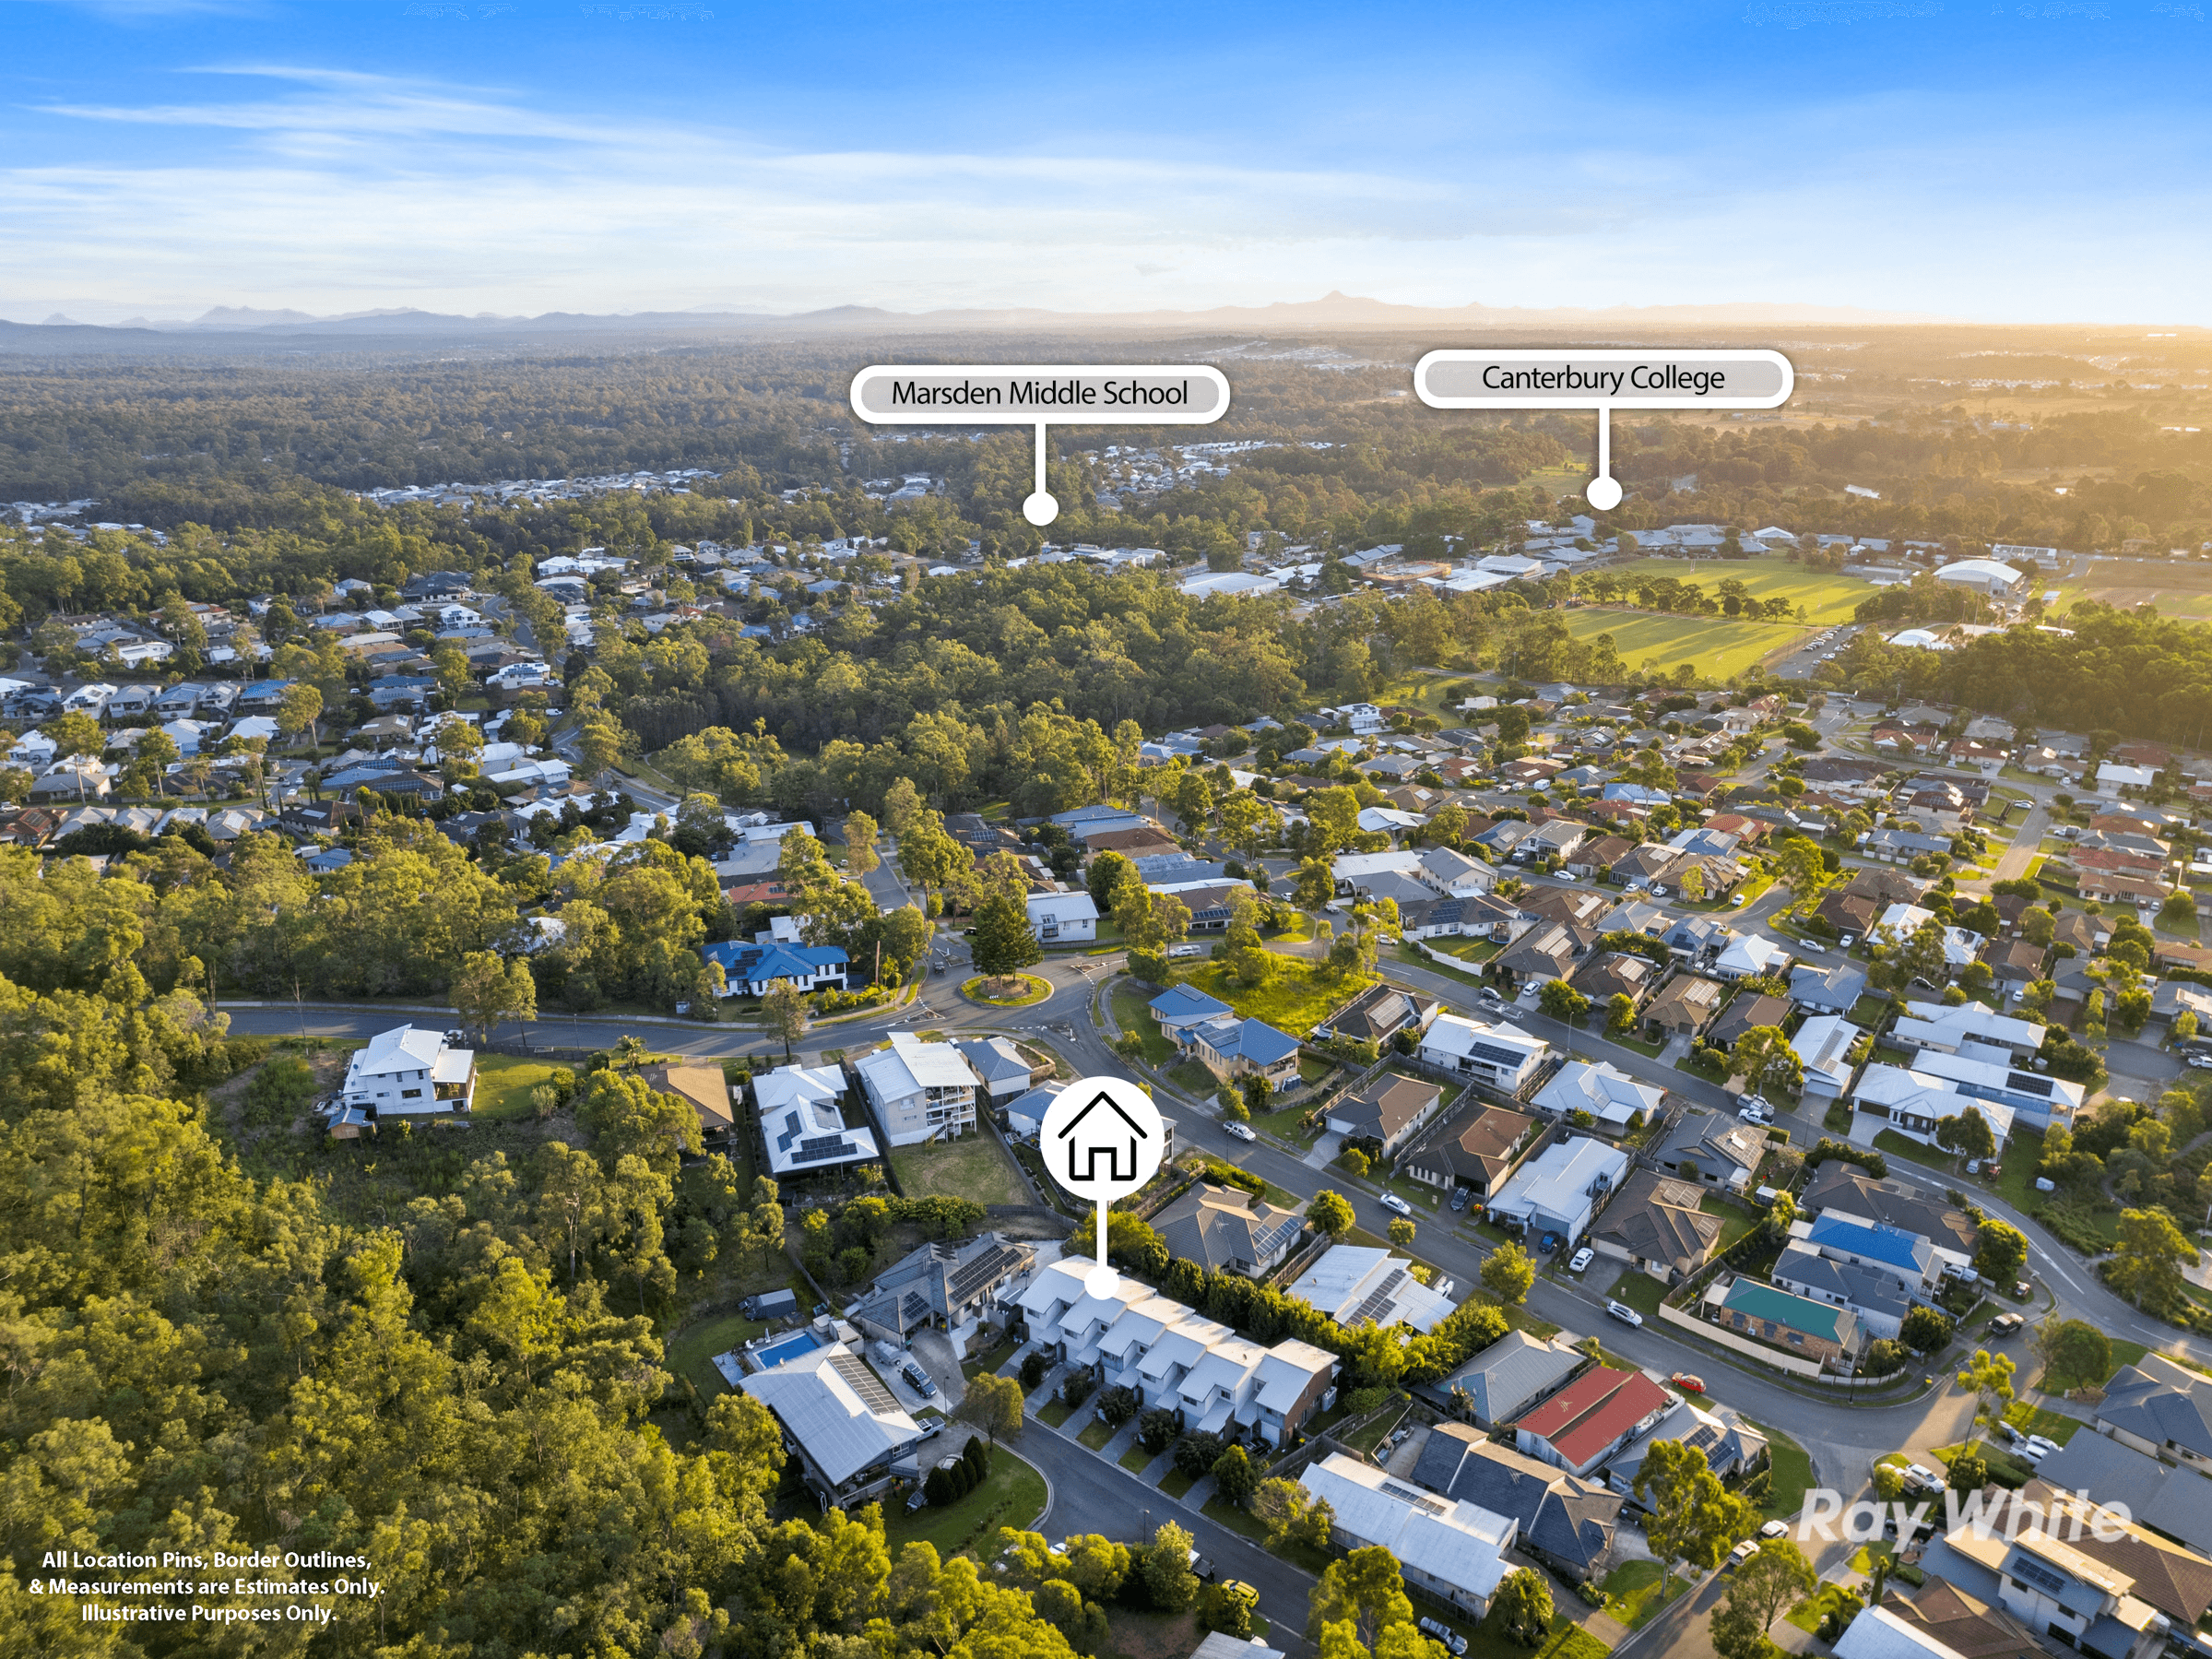 2/7-9 Undara Place, WATERFORD, QLD 4133